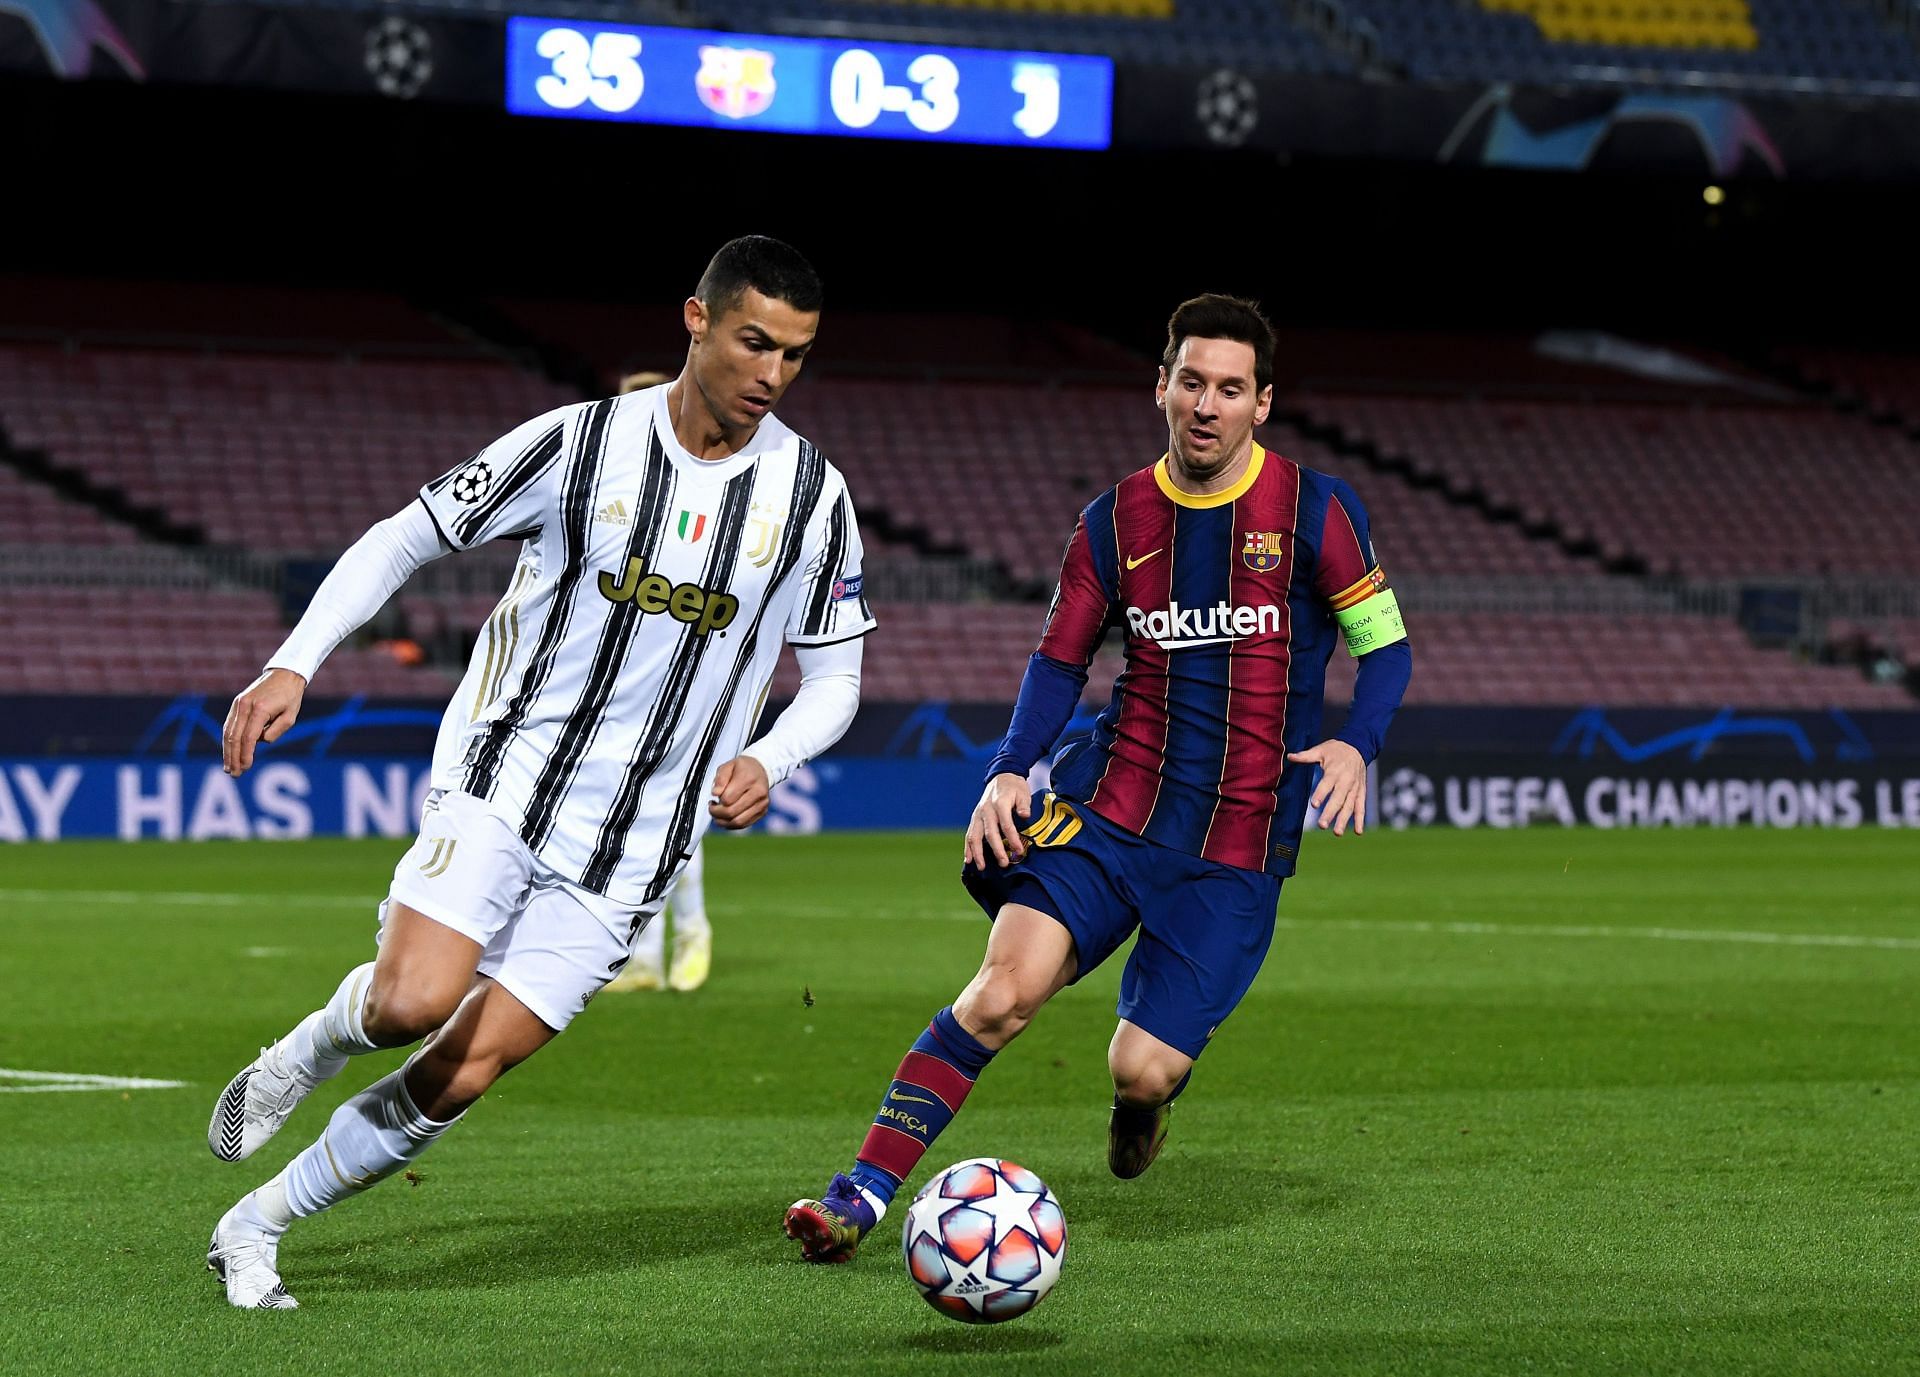 The two superstars in Champions League action.